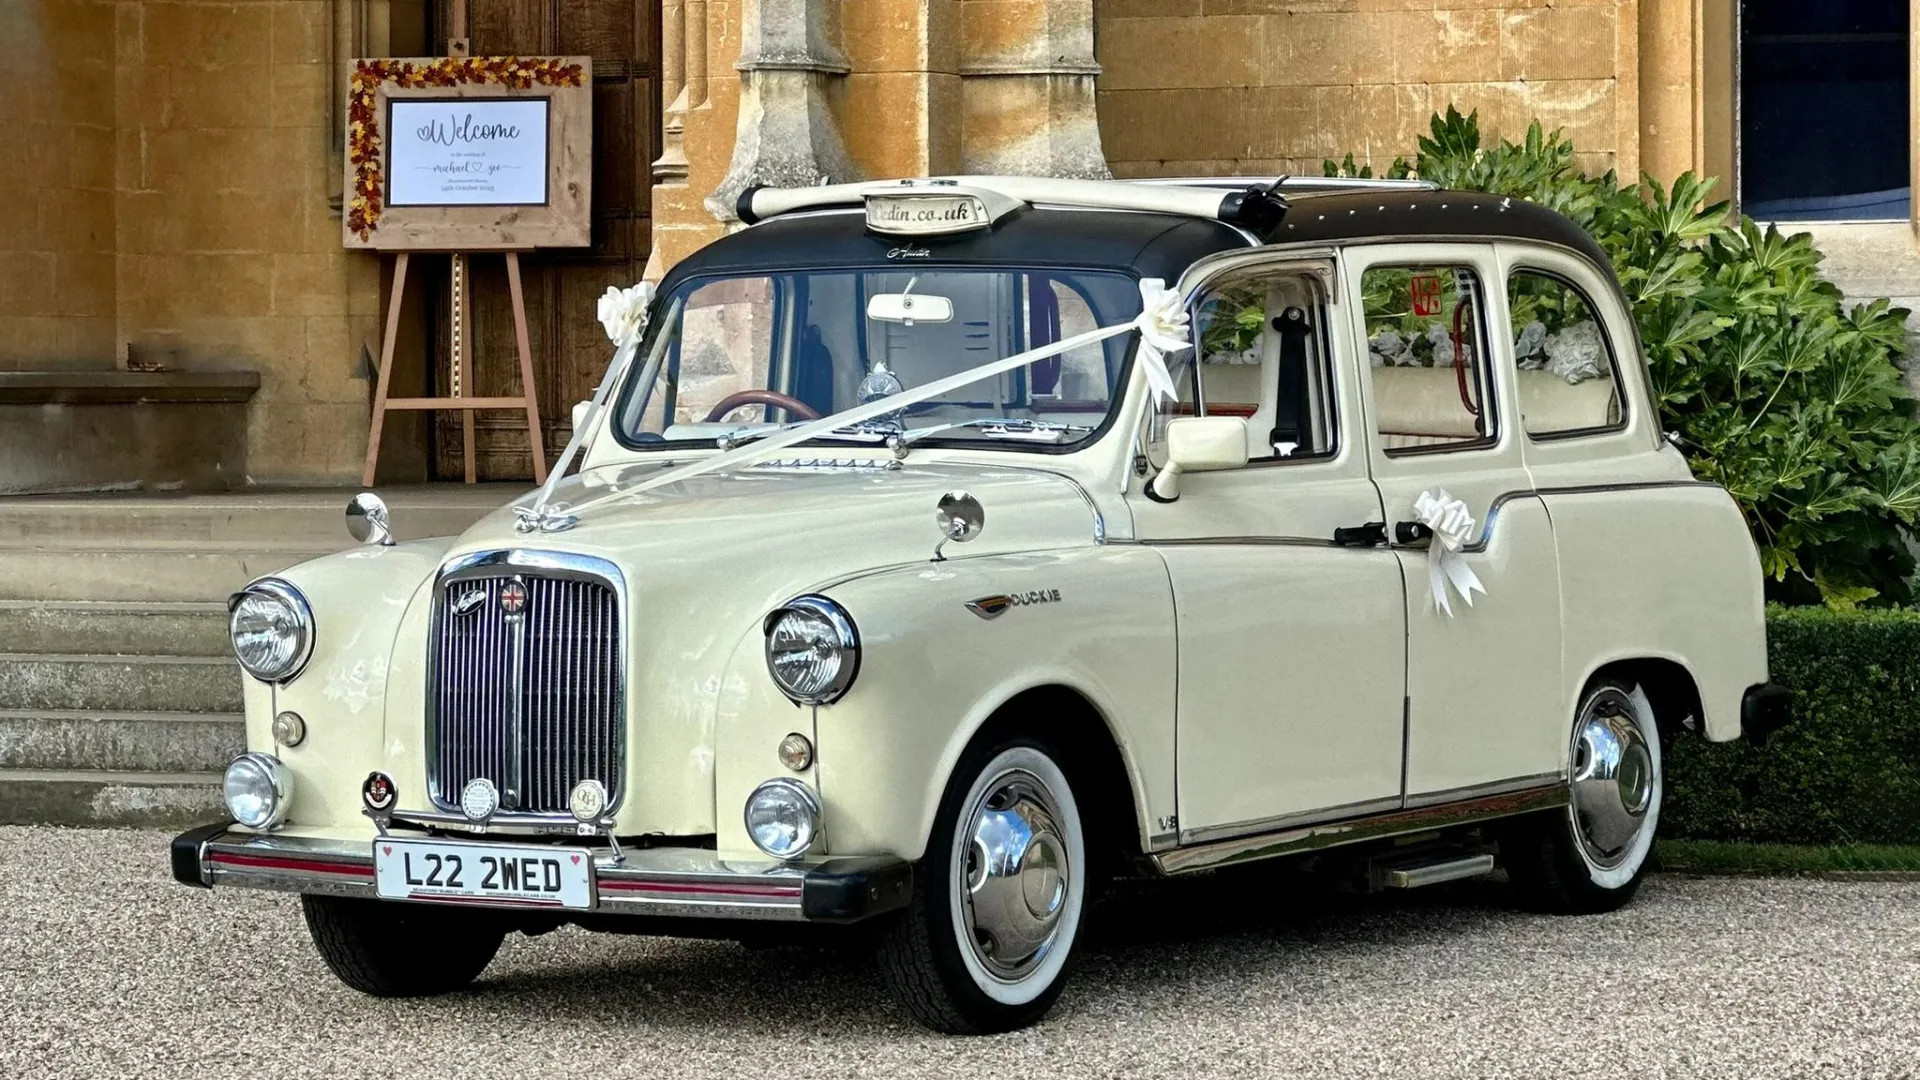 Front view classic Taxi Cab decorated with white ribbons in front of wedding venue in Essex